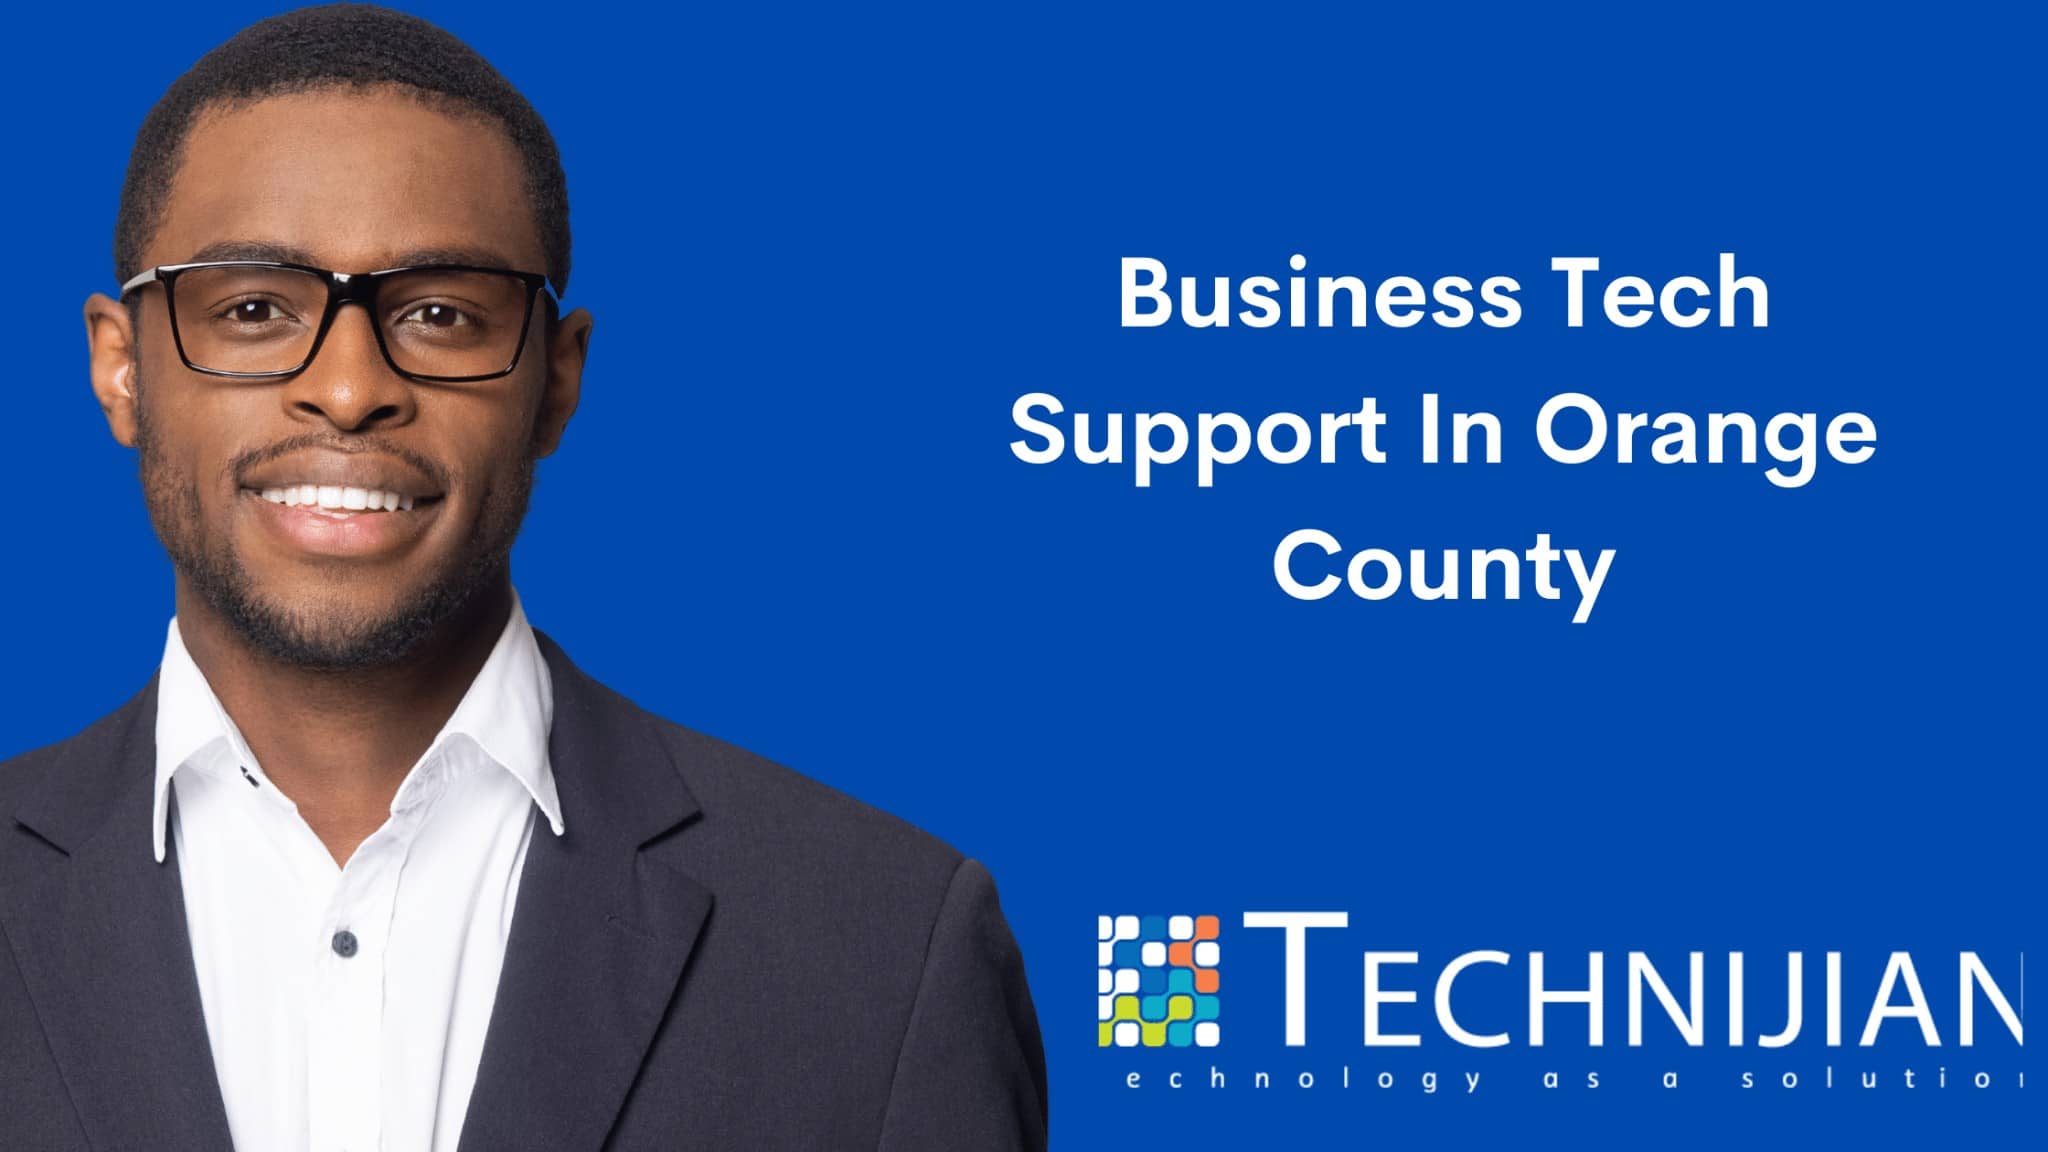 Business Tech Support In Orange County